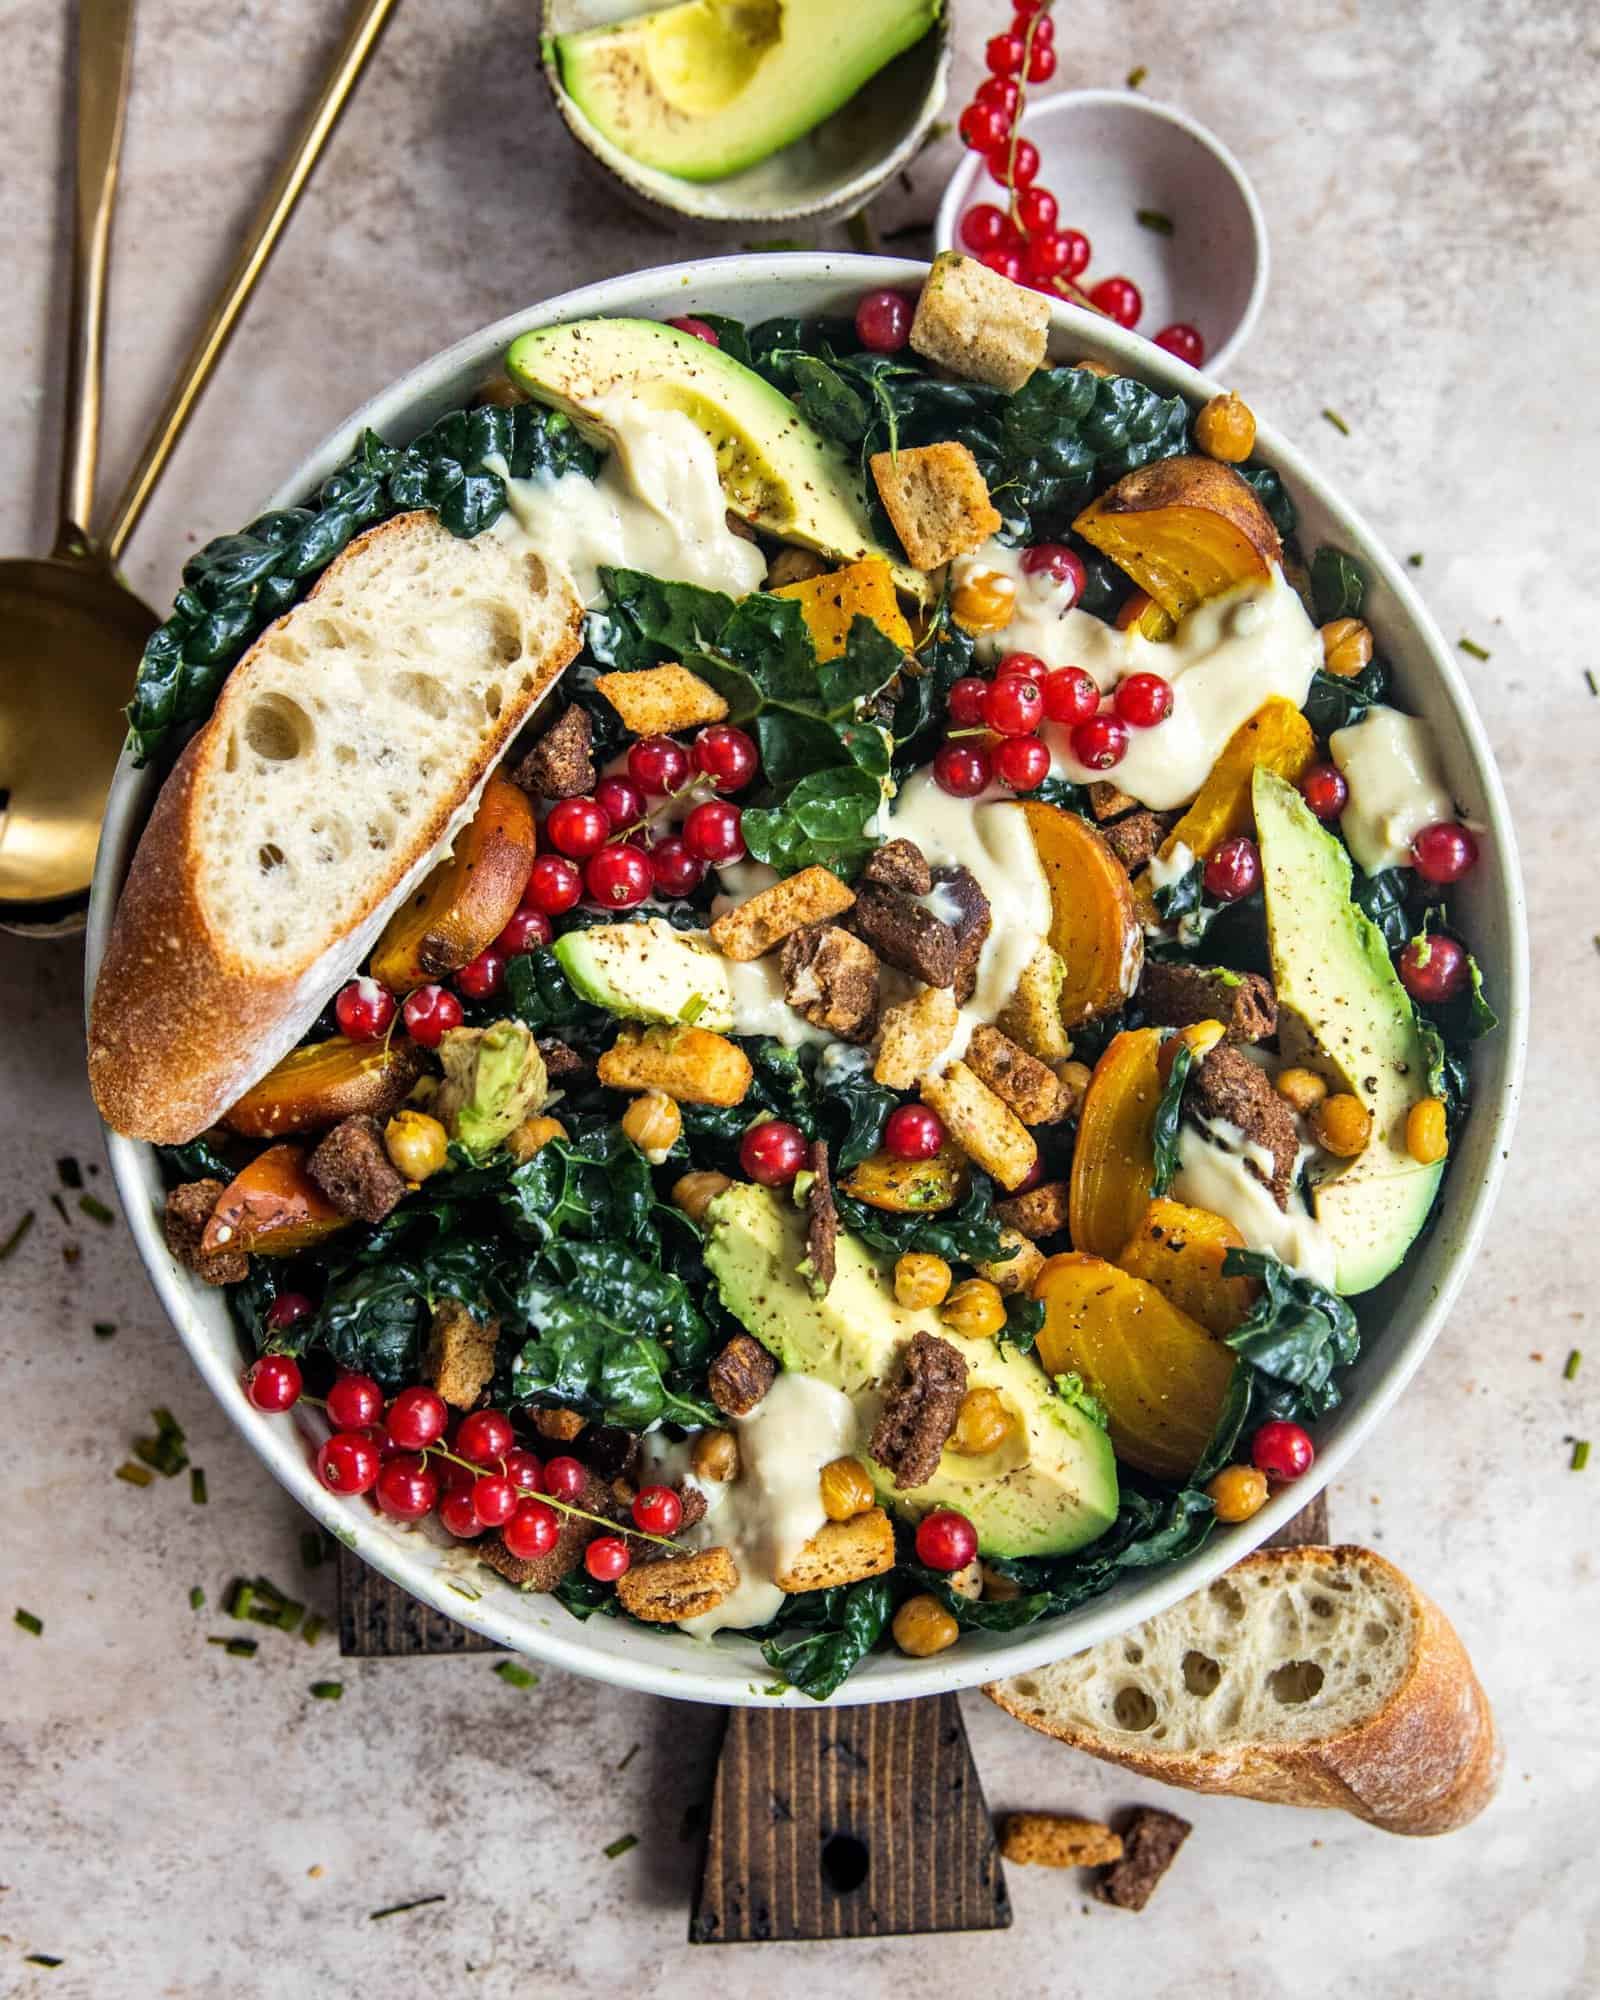 vegan kale caesar salad in a bowl with avocados and red currants